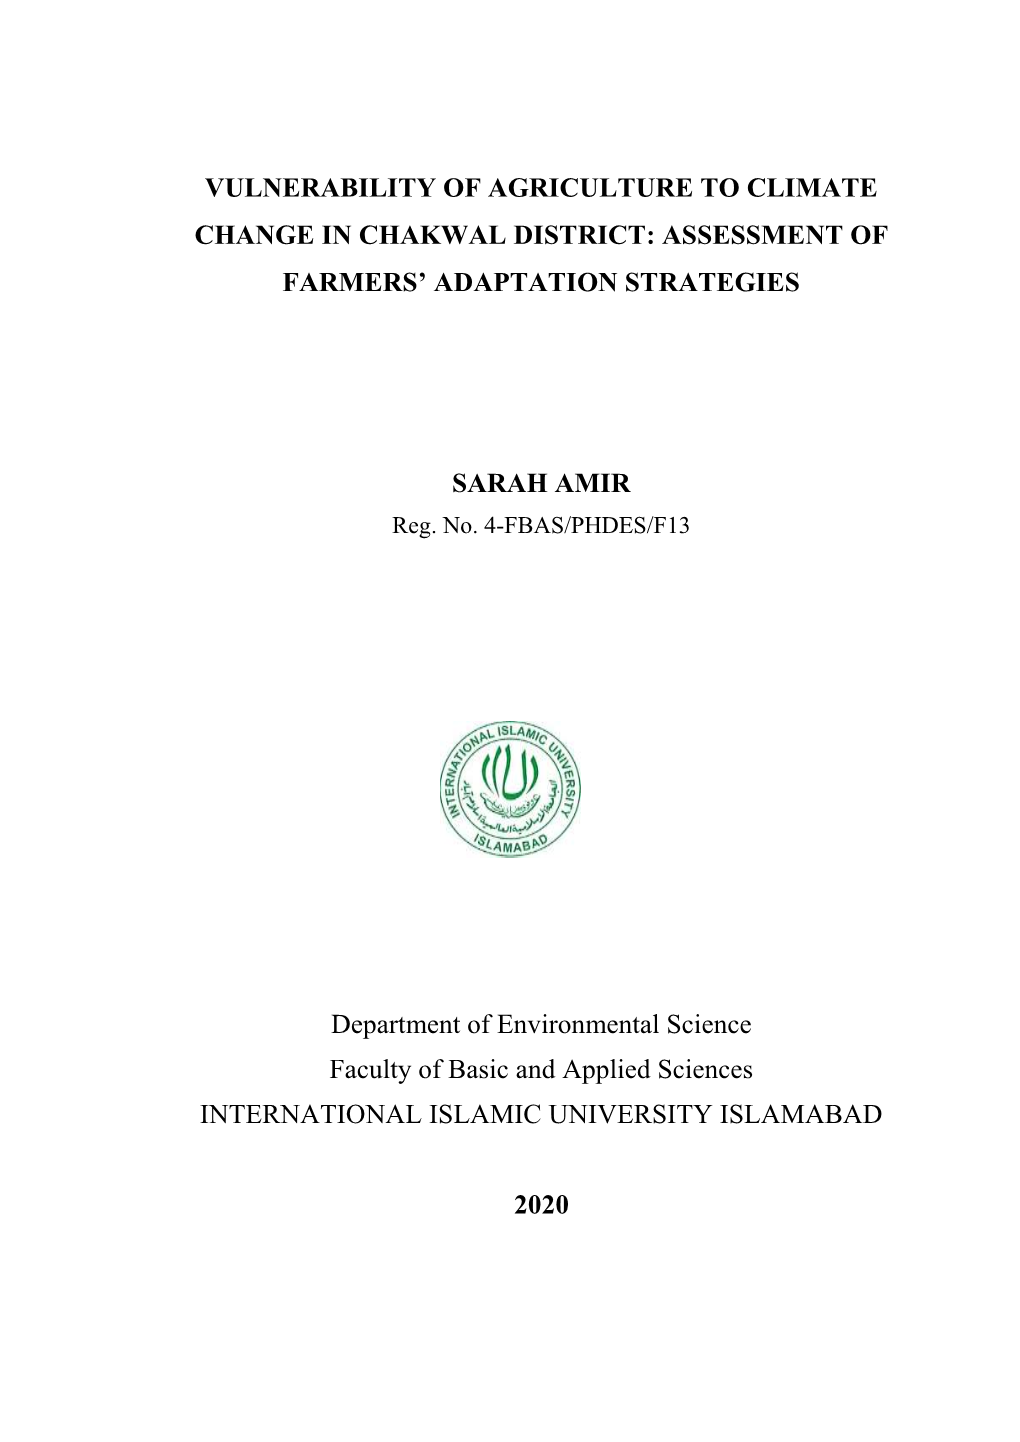 Vulnerability of Agriculture to Climate Change in Chakwal District: Assessment of Farmers’ Adaptation Strategies